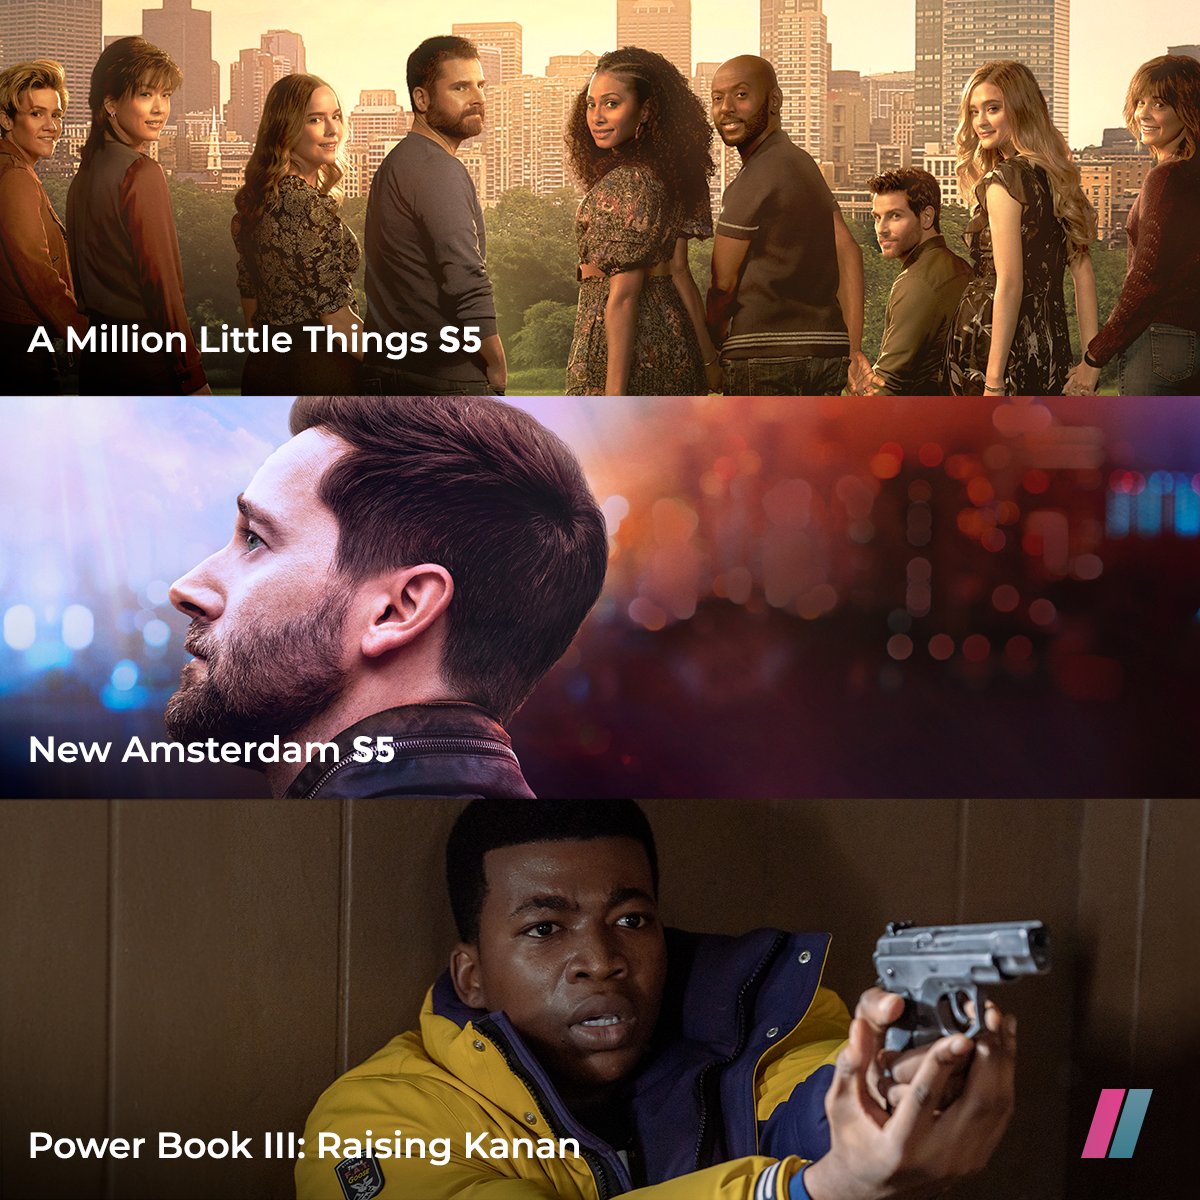 Your weekend watchlist is here 📺 Watch #AMillionLittleThings #NewAmsterdam and #PowerBookRaisingKanan now streaming on Showmax 🍿